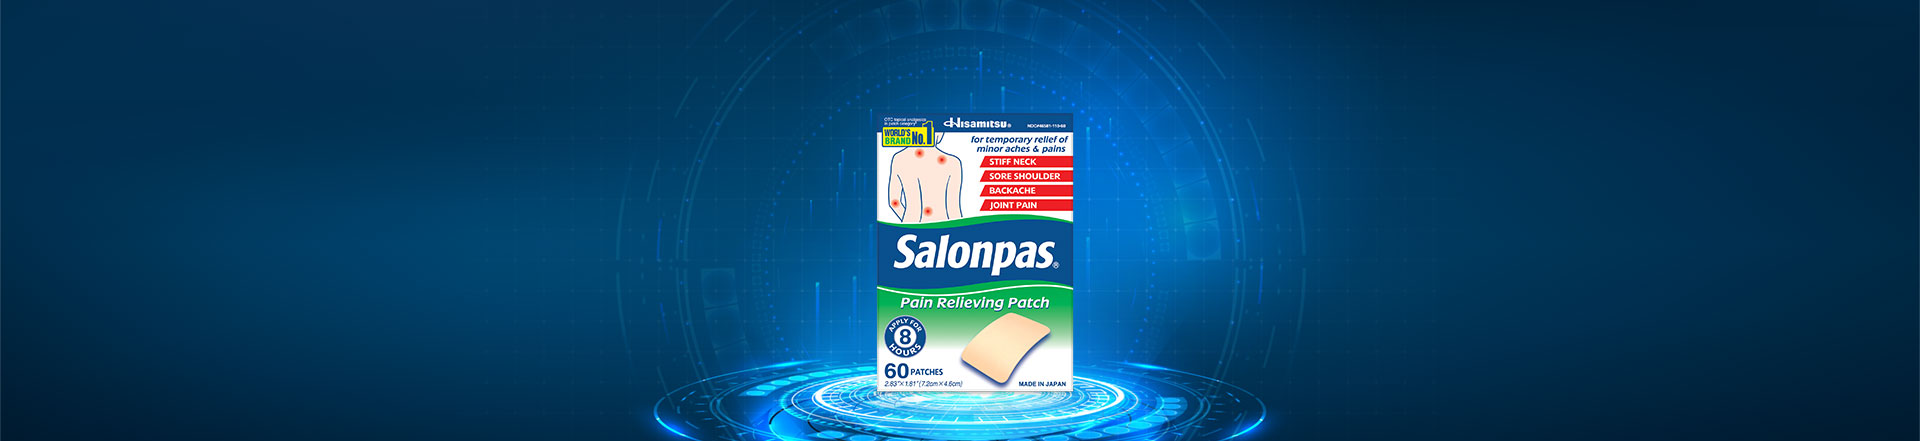 A box of Salonpas Pain Relieving Patch on display